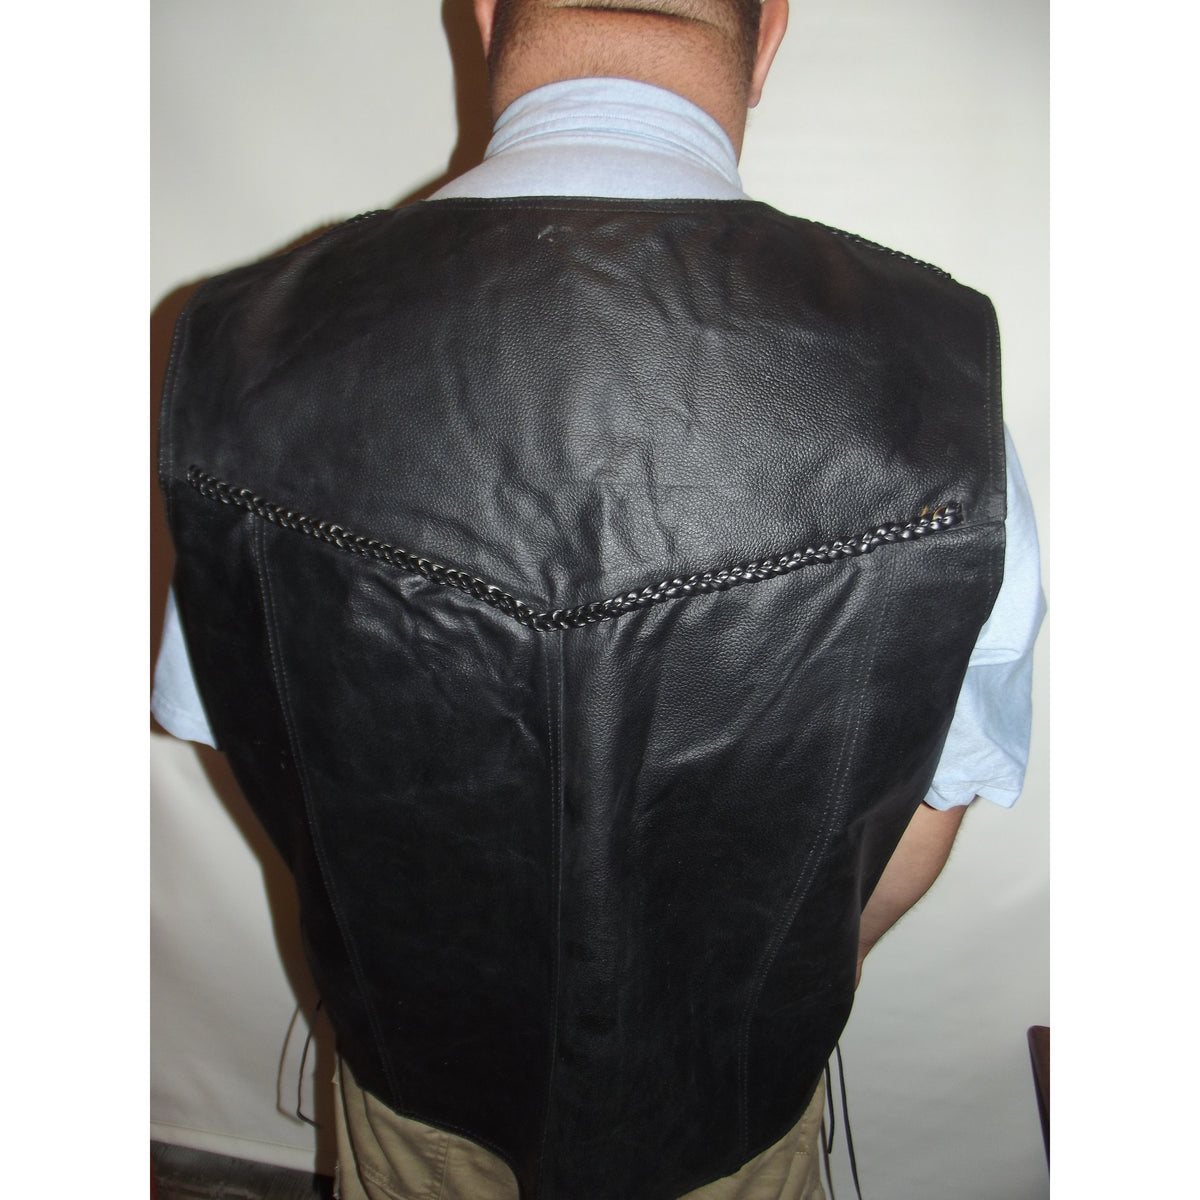 Mens Heavy Black Leather Biker Motorcycle Braided Vest with side laces